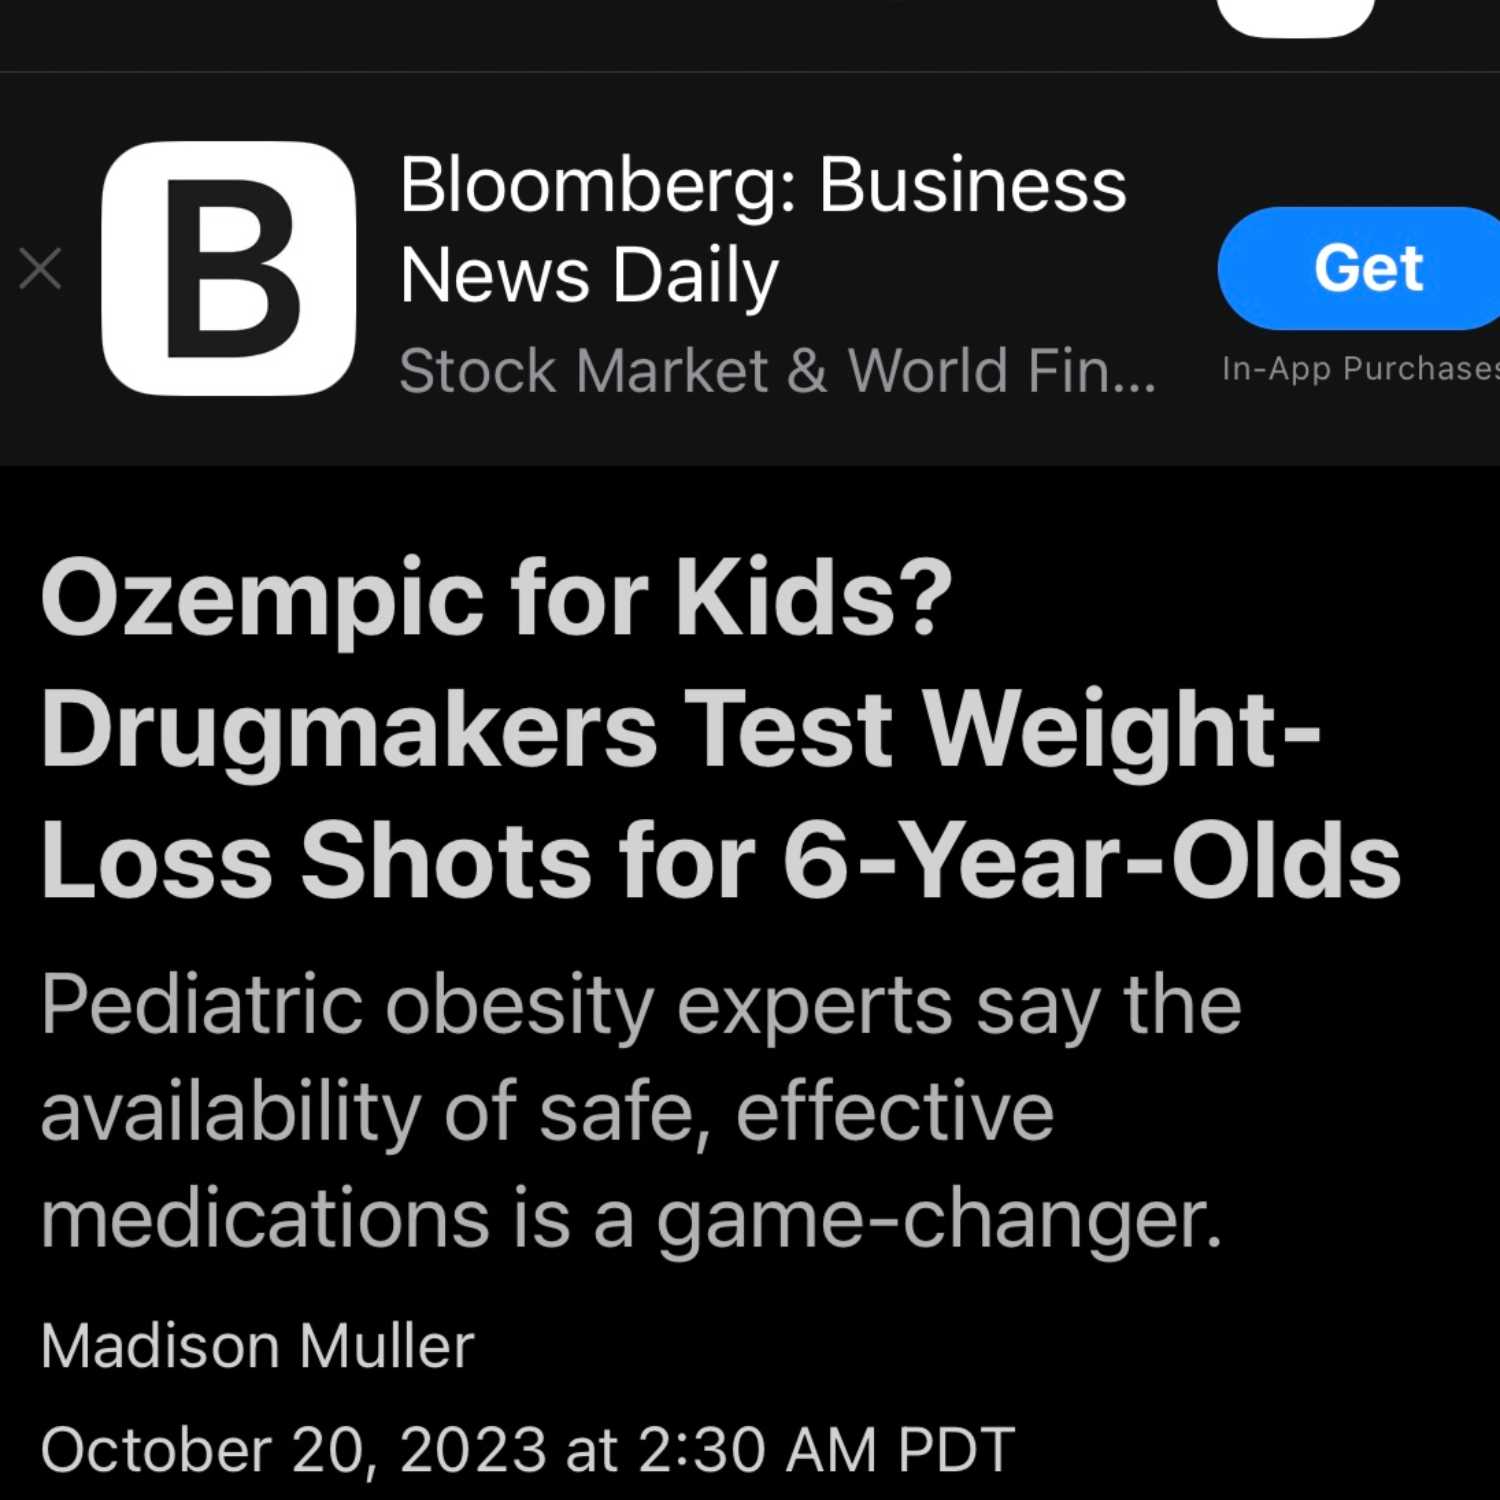 Ozempic for 6-year-olds